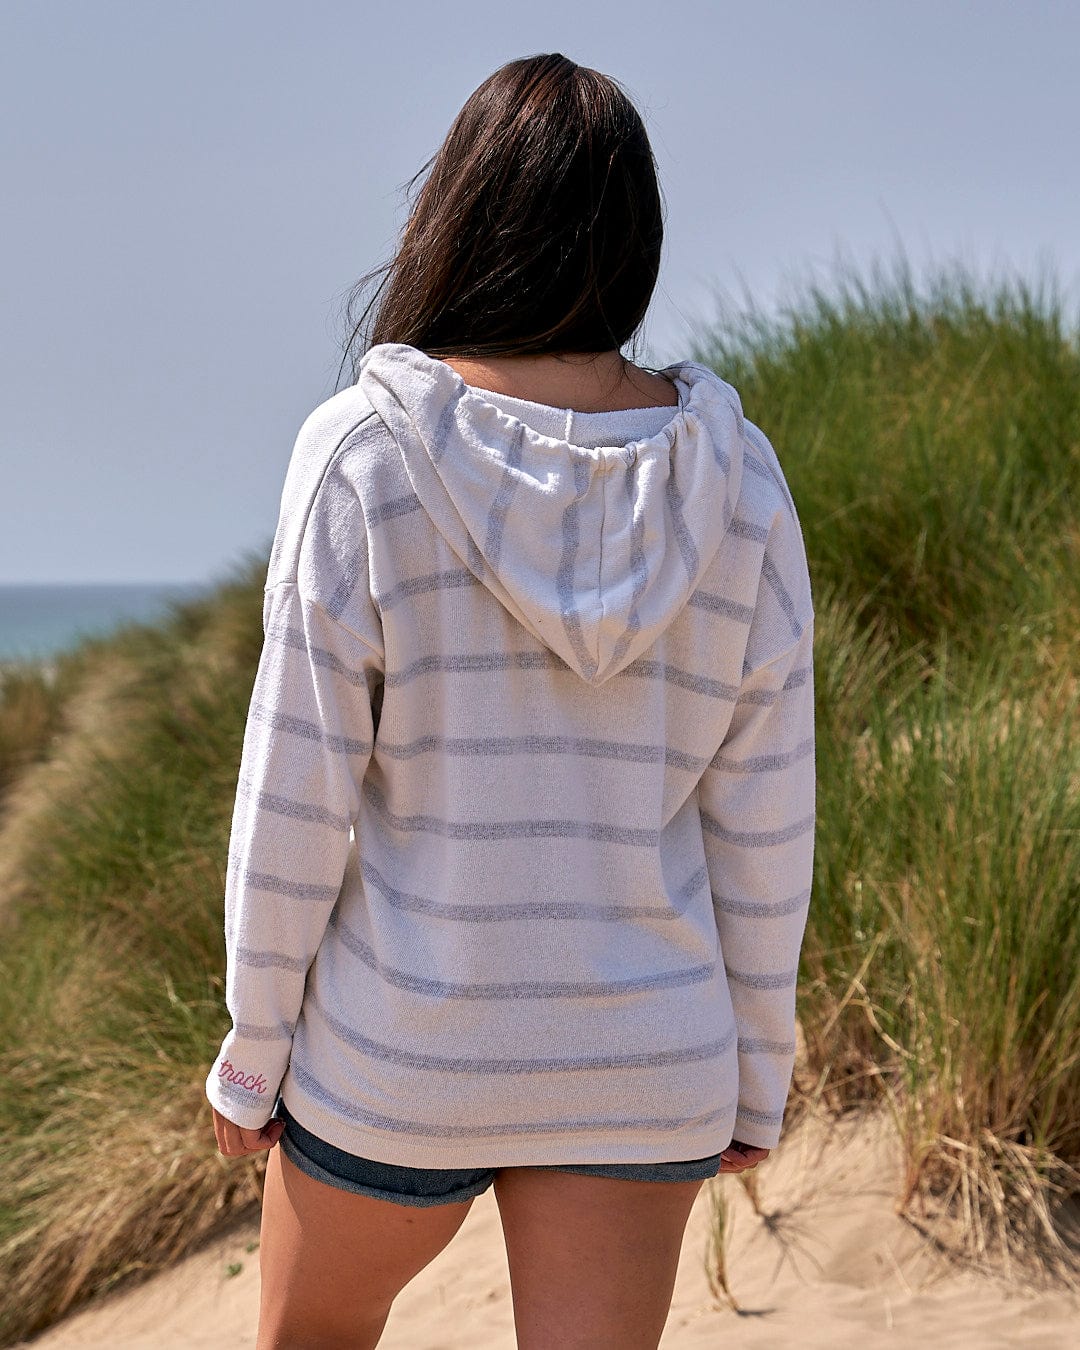 A woman wearing a Saltrock Kennedy - Womens Pop Hoodie - Cream, with white stripes, walking on a sand dune.